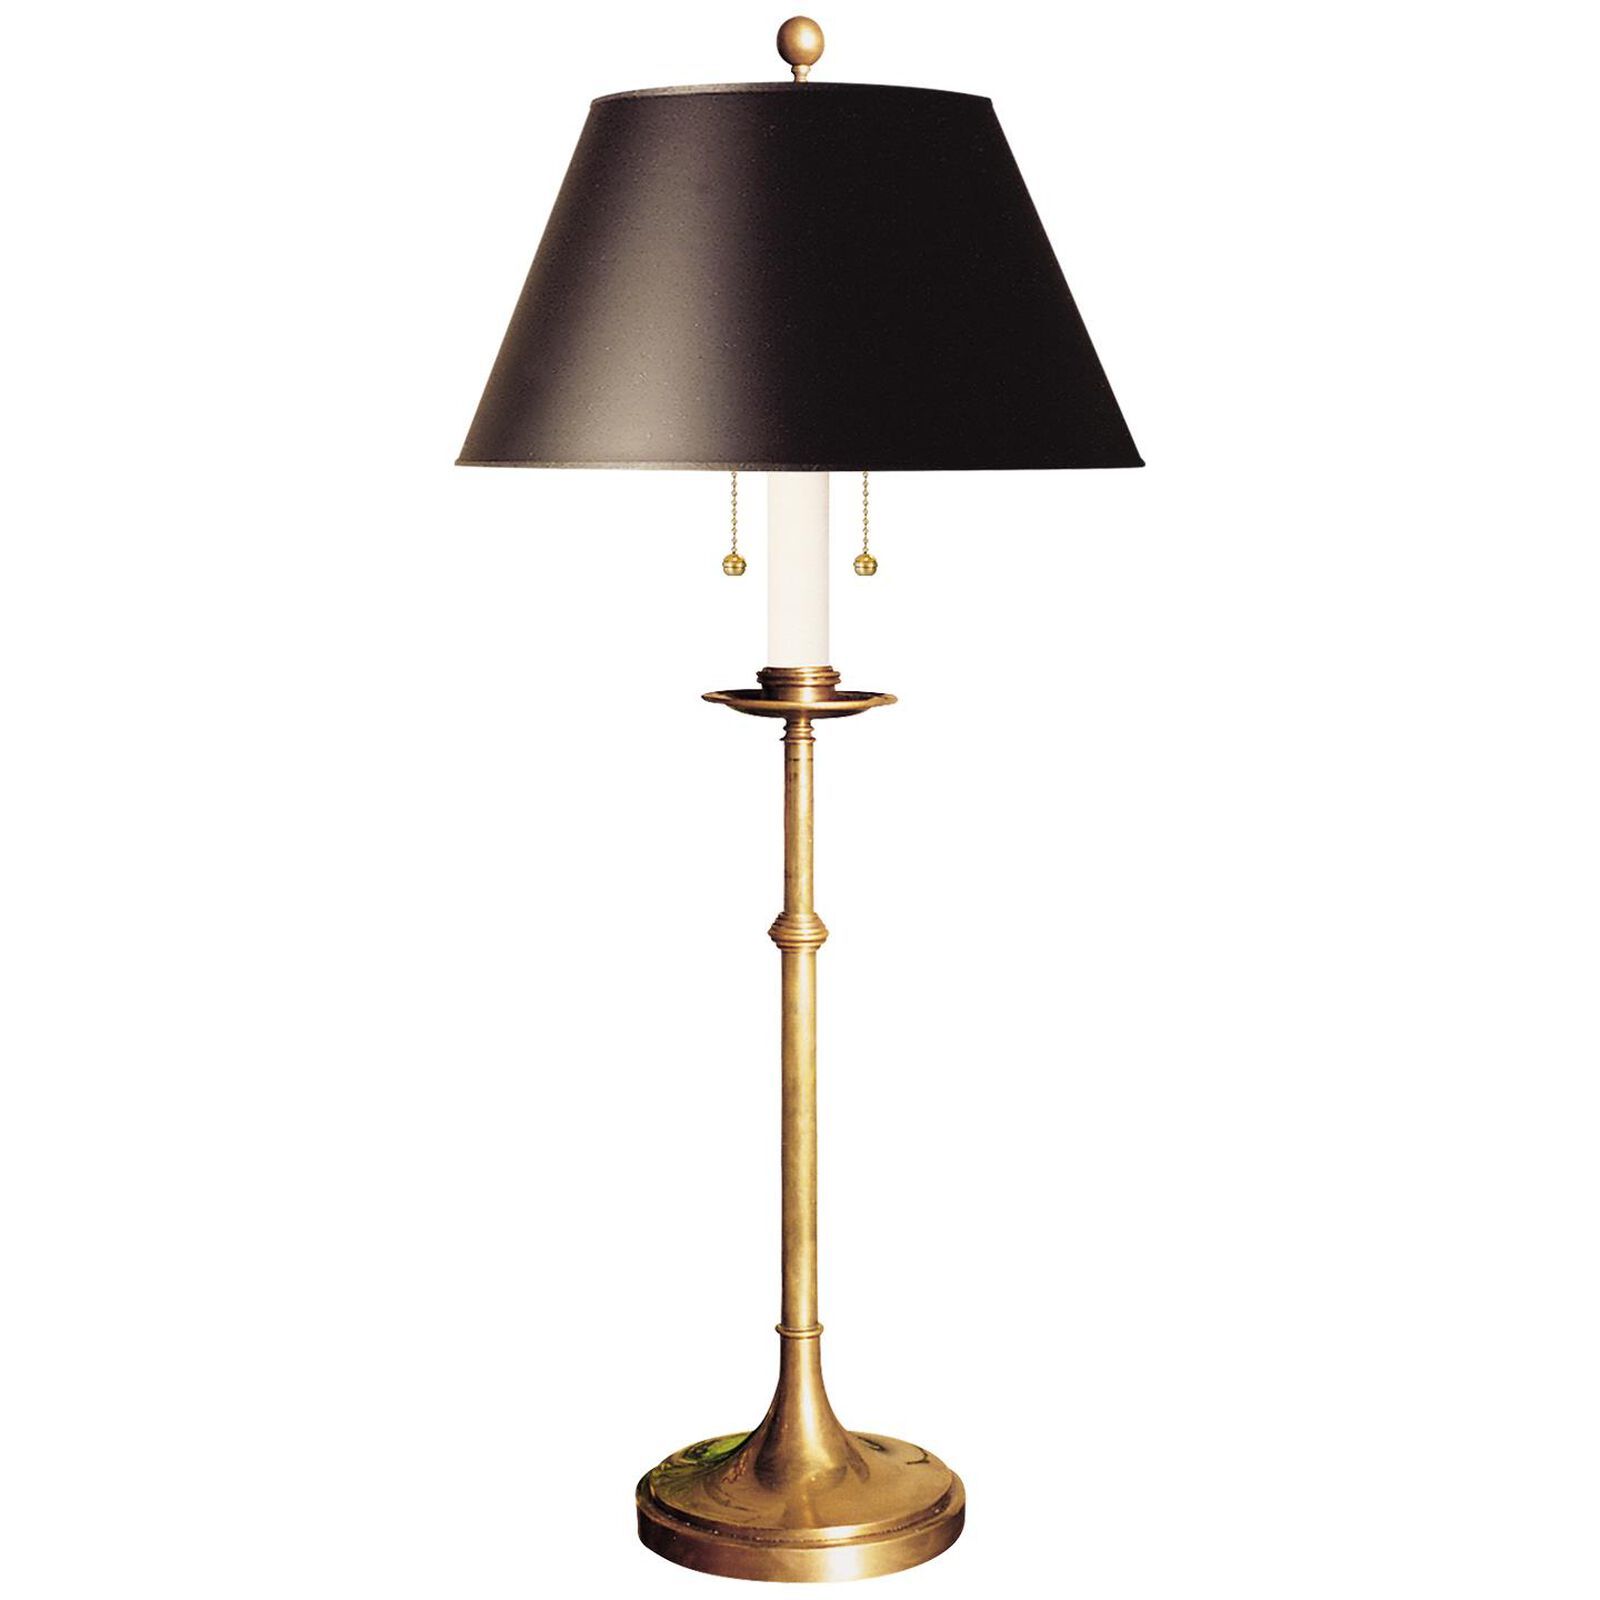 E. F. Chapman Dorchester 22 Inch Table Lamp by Visual Comfort and Co. | Capitol Lighting 1800lighting.com